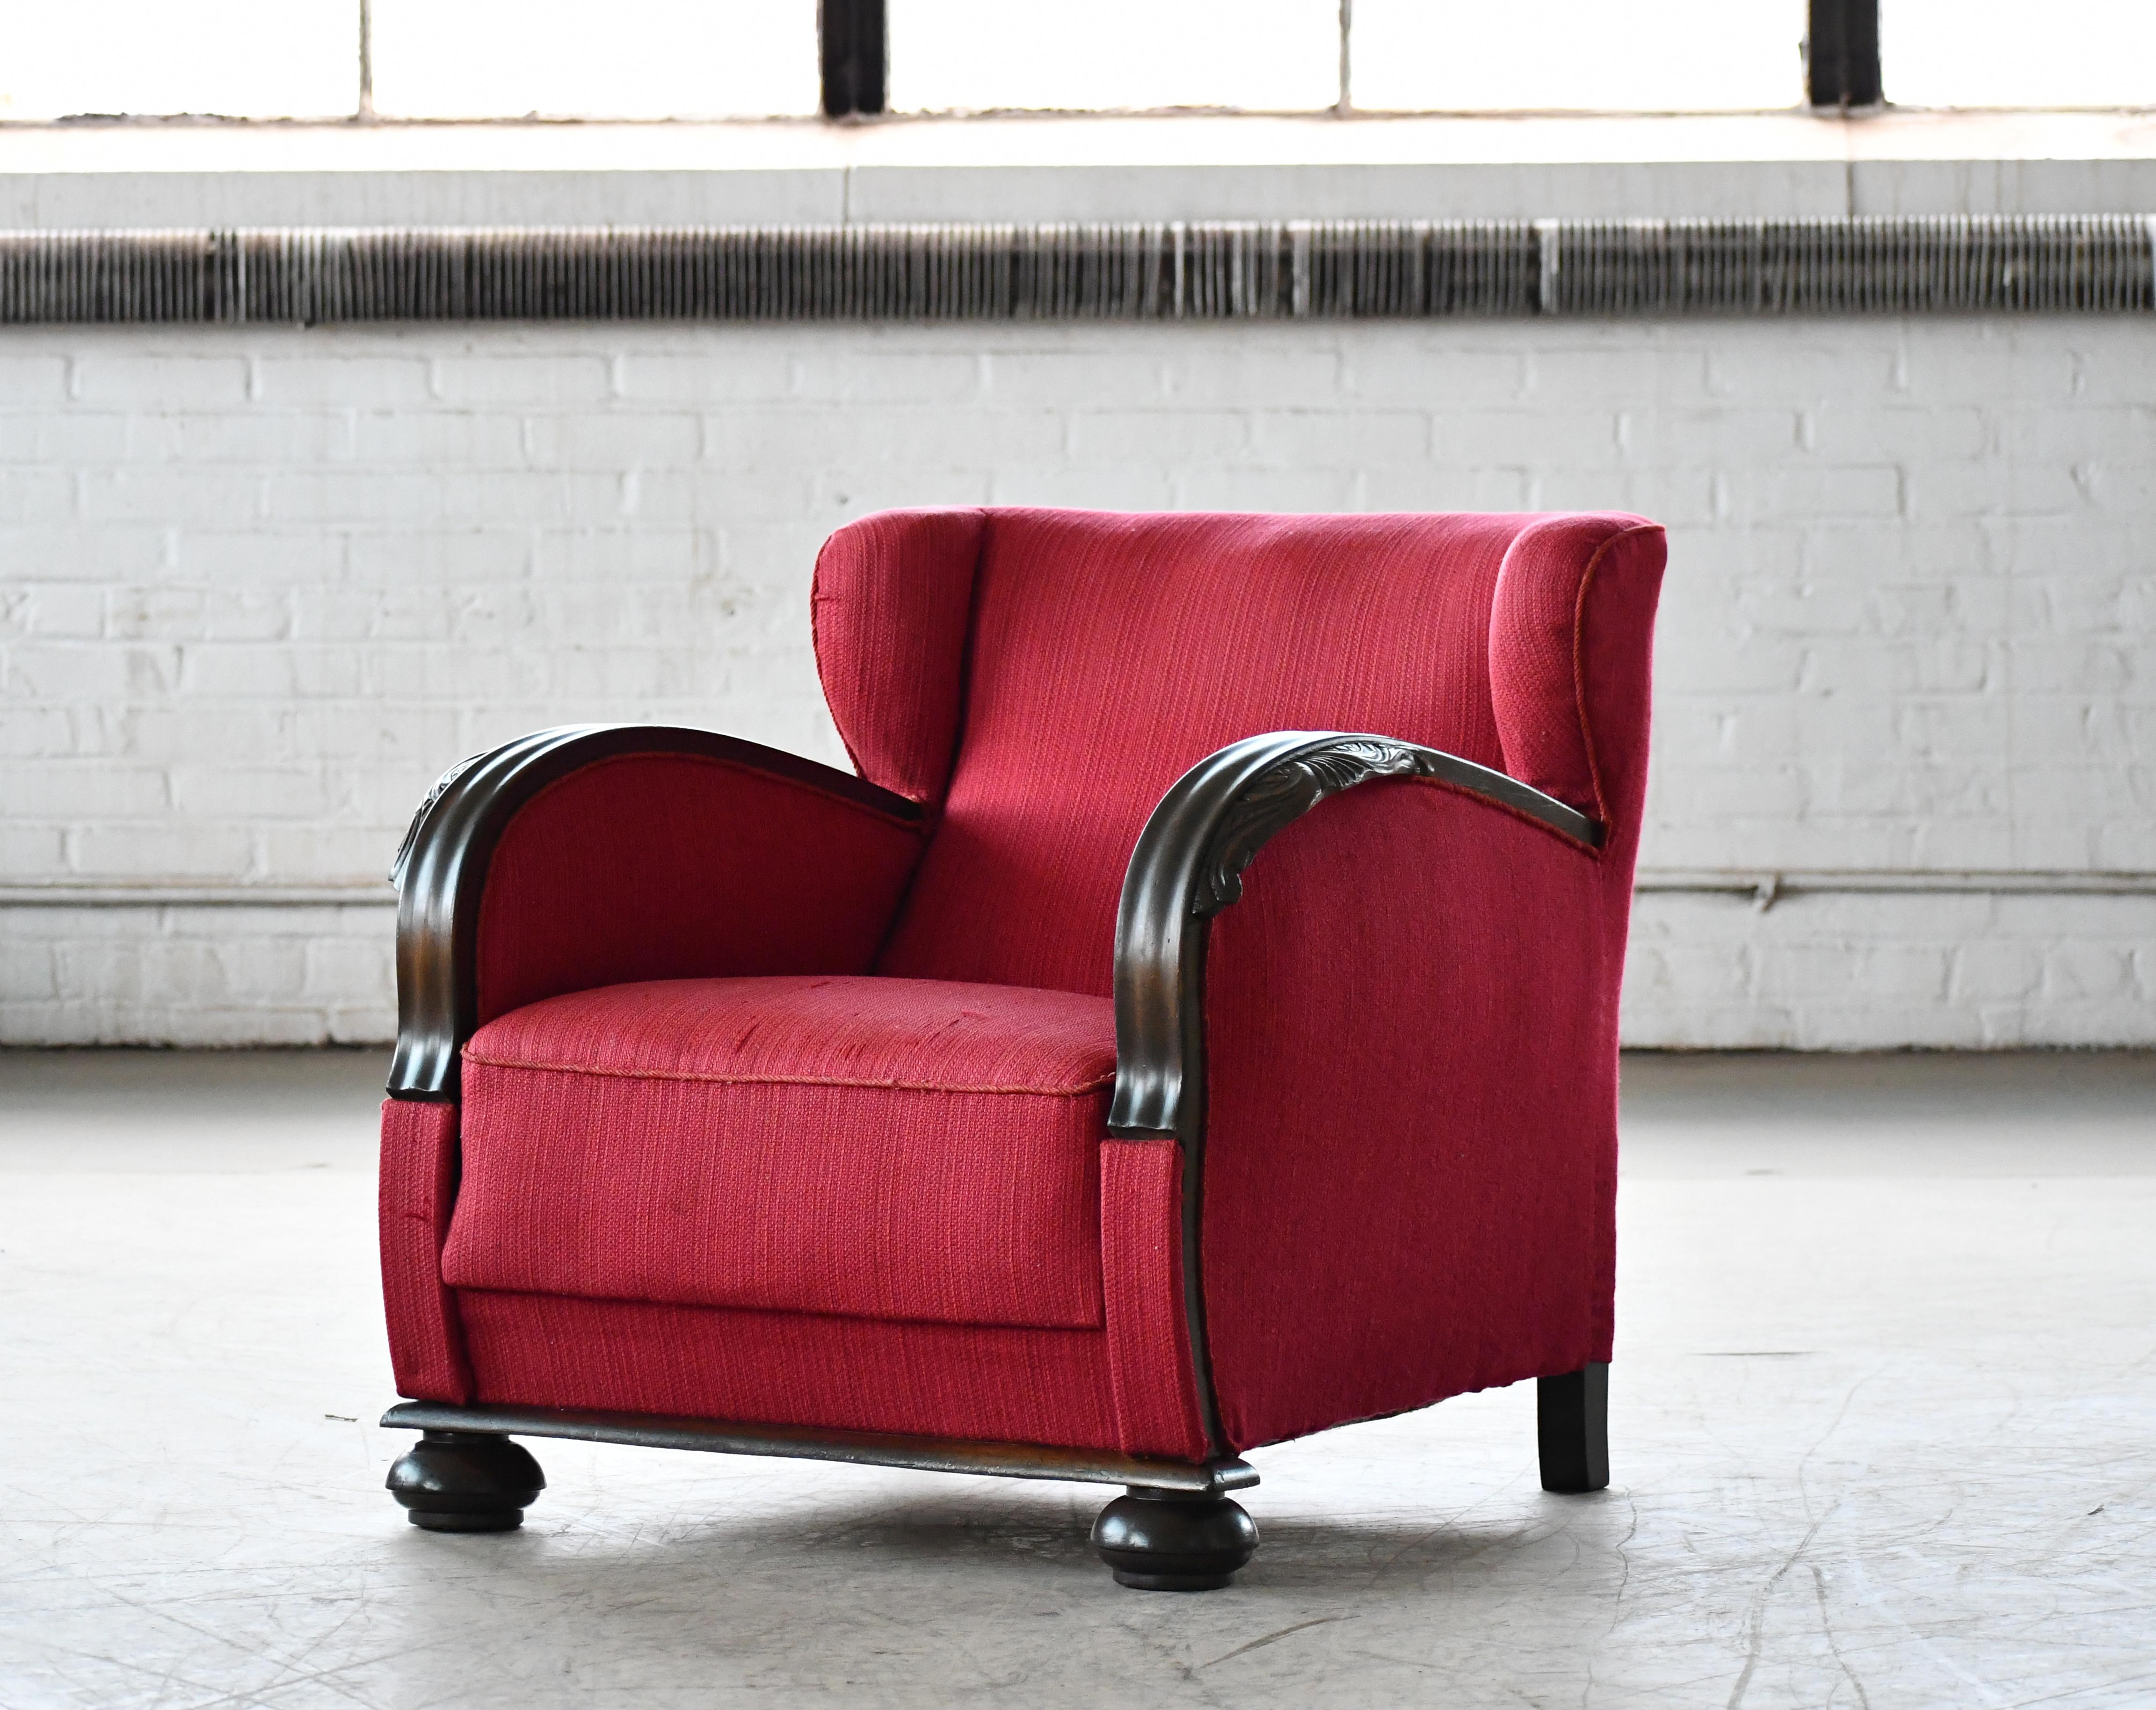 Danish 1930s Art Deco Lounge Chair in Red Mohair with Carved Armrests In Good Condition For Sale In Bridgeport, CT